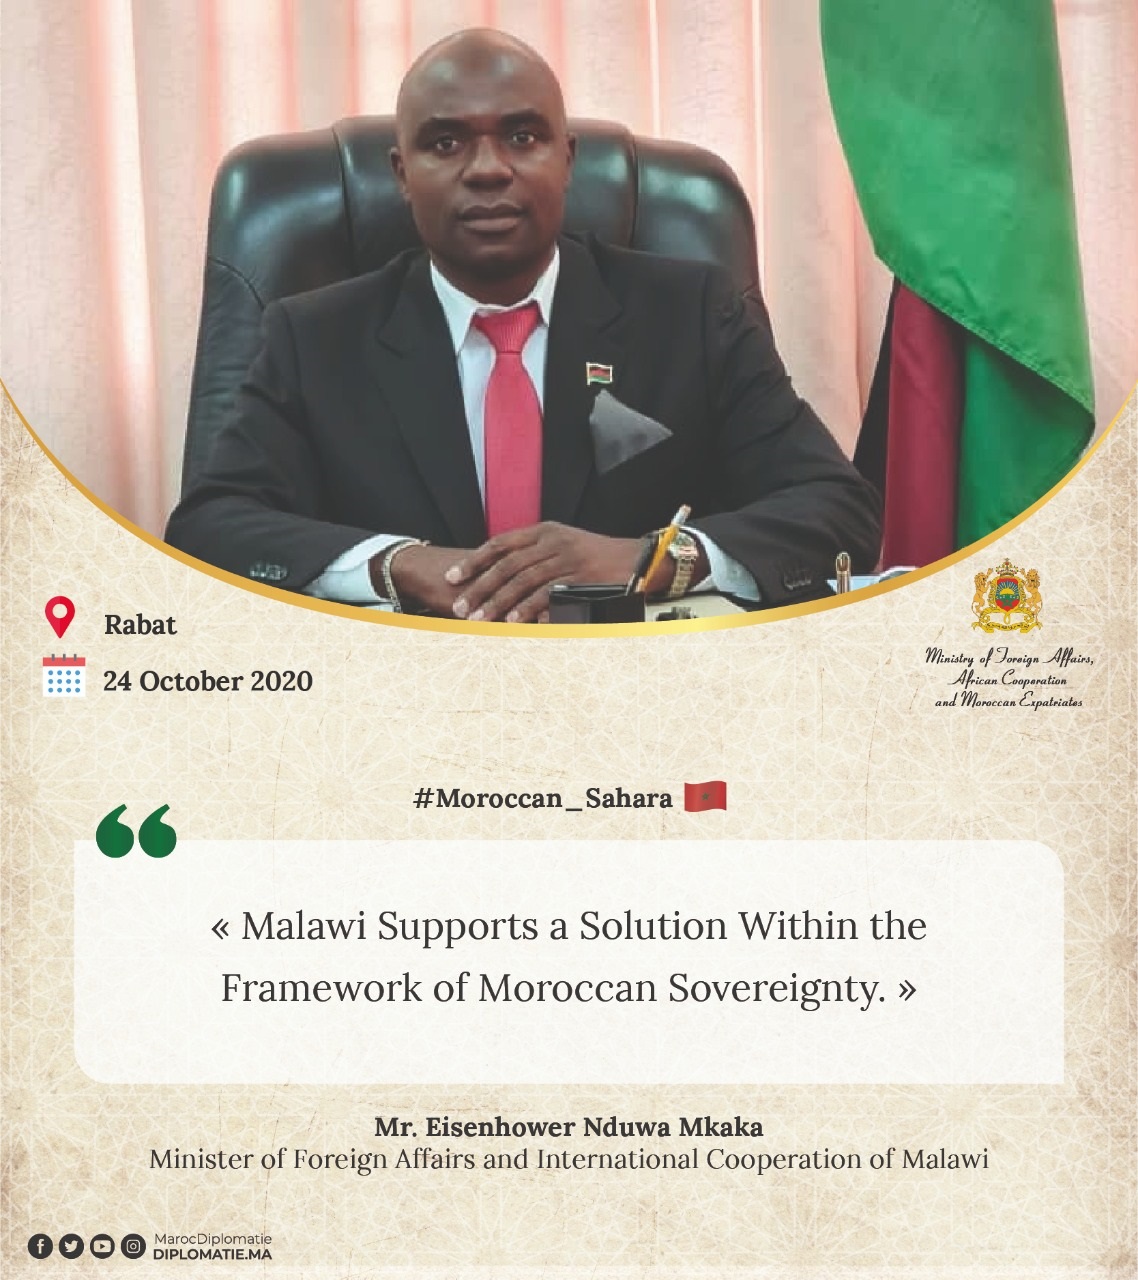 Statement made by Mr. Eisenhower Nduwa Mkaka, Minister of Foreign Affairs and International Cooperation of Malawi